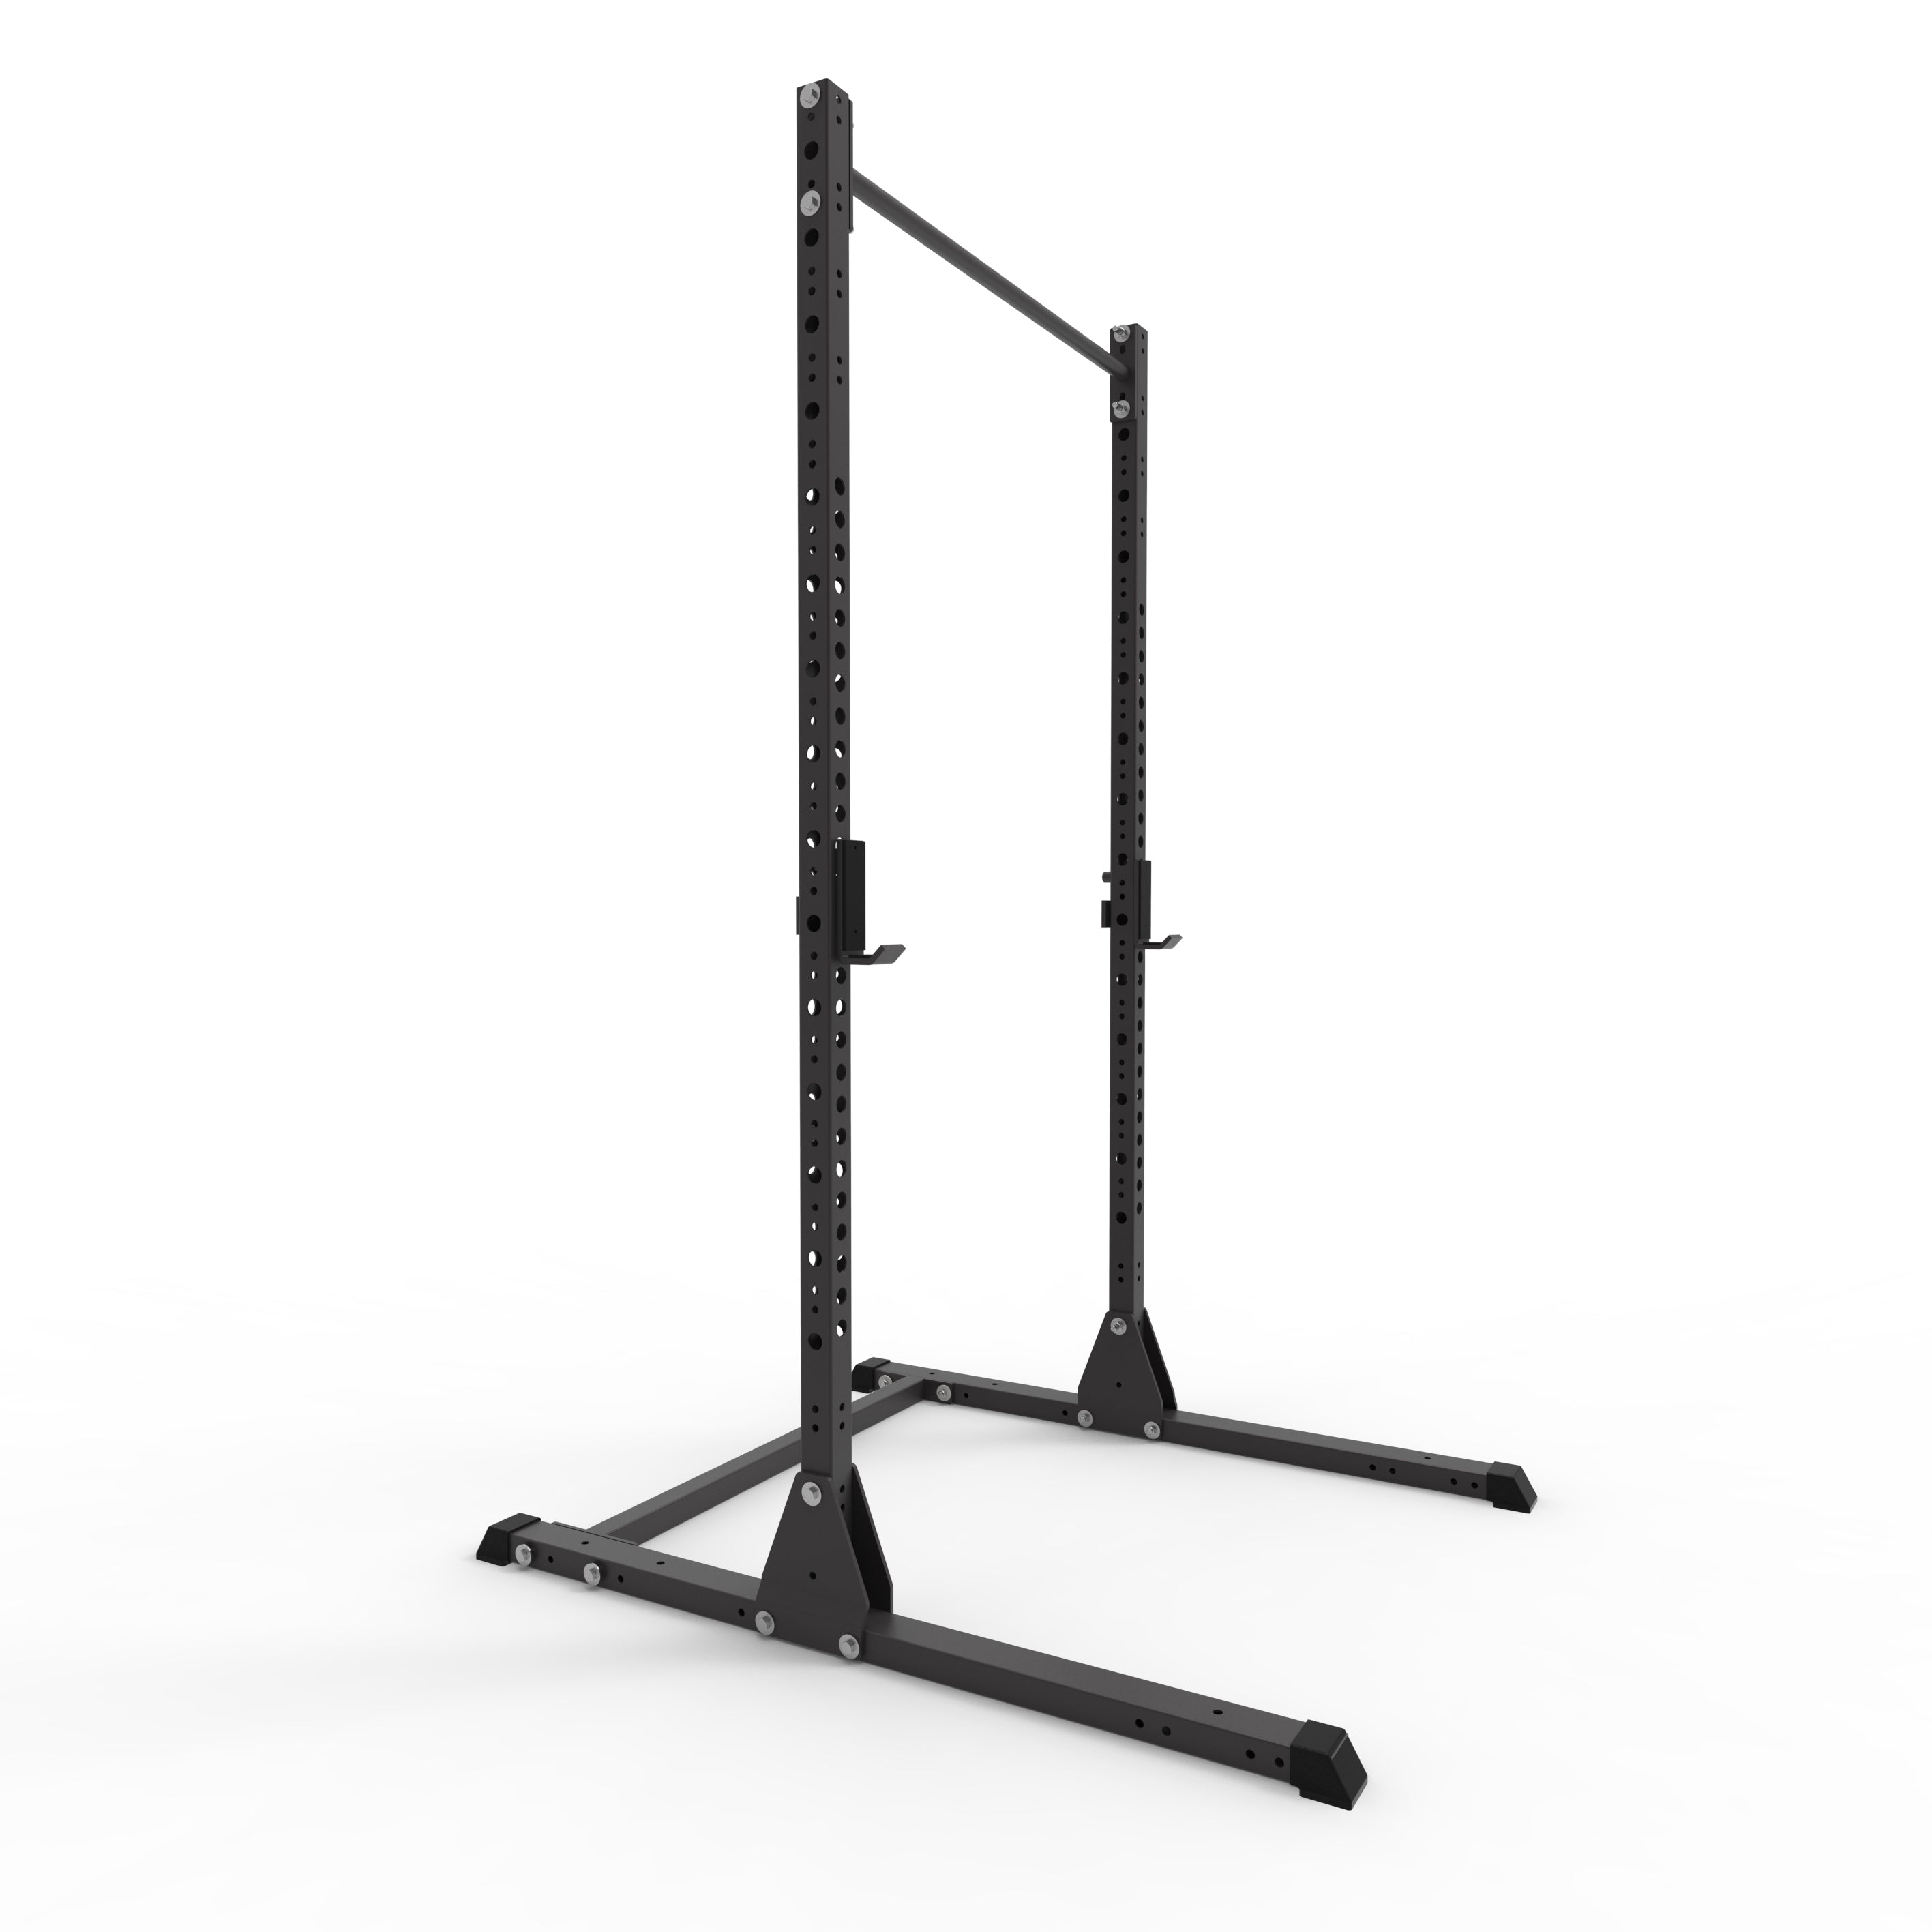 X Training Equipment X3 Squat Stand with Pull-up Bar